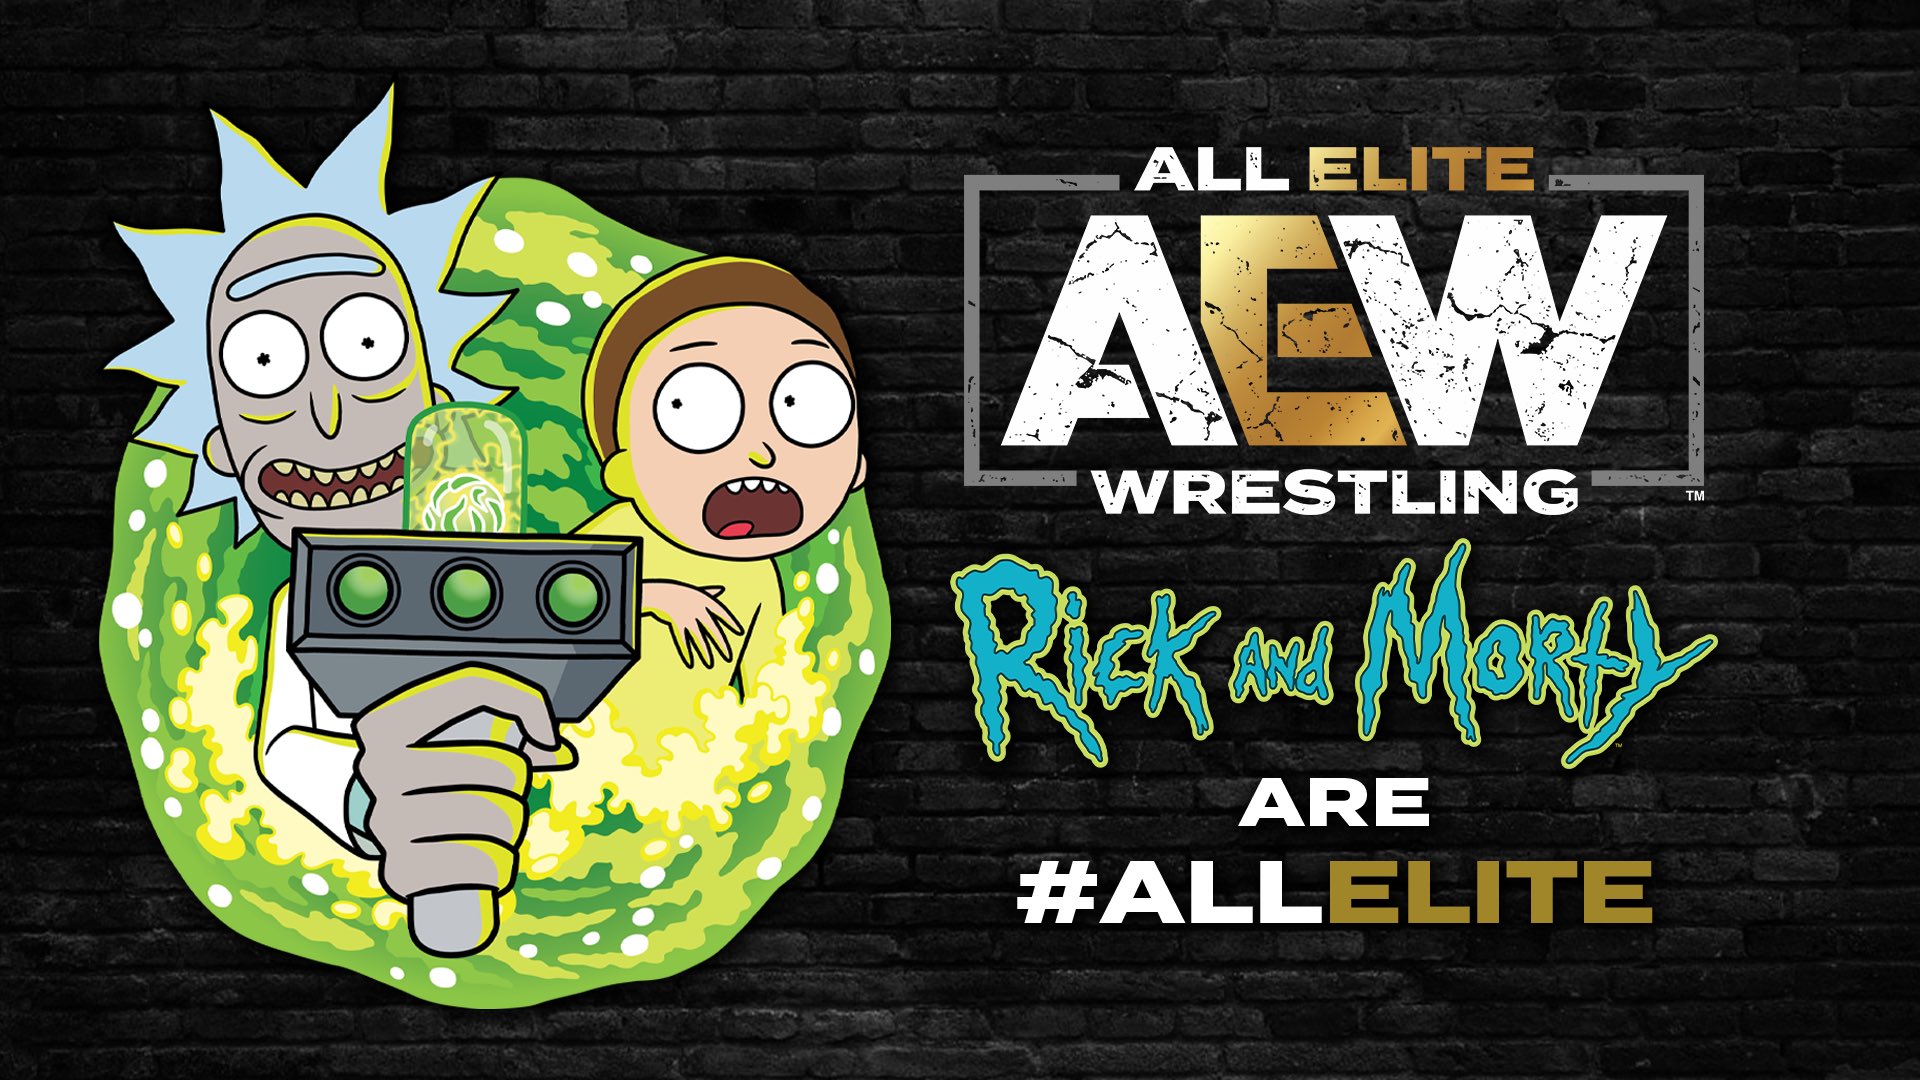 "Rick and Morty" to AEW?